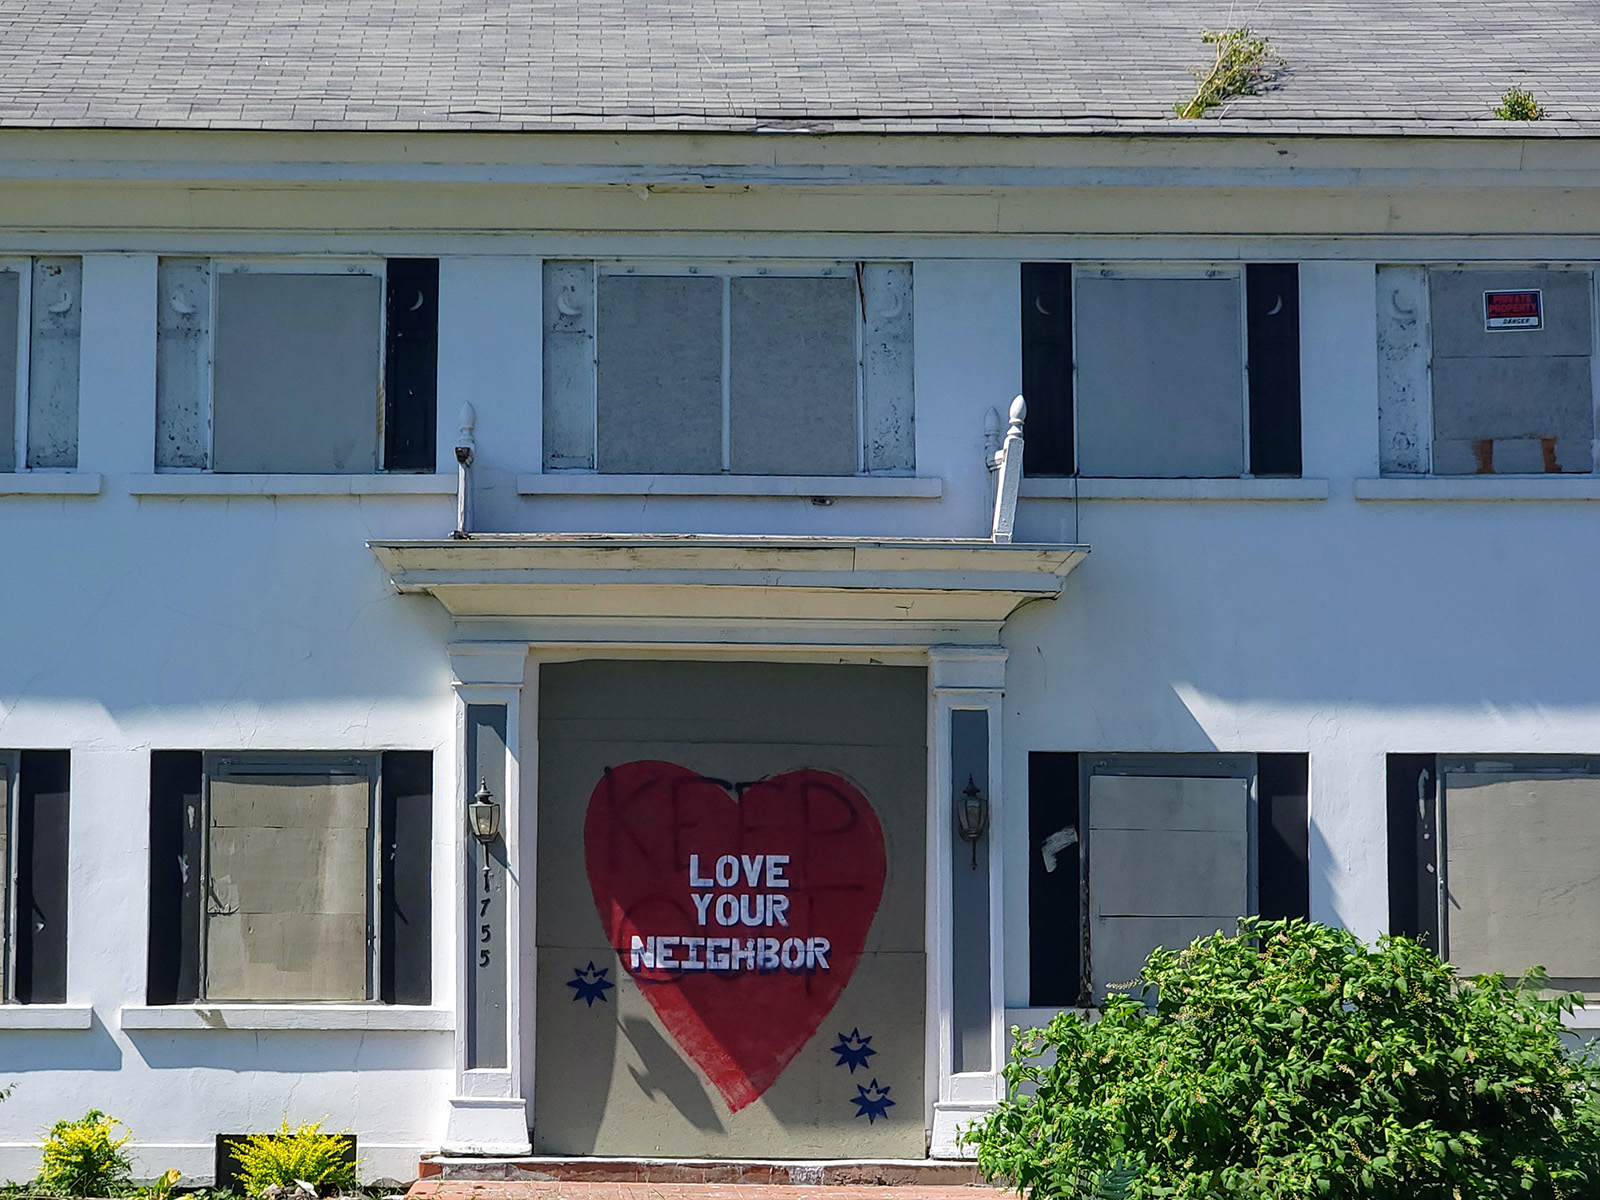 University Heights developer applies for demo, house gets tagged with heart graffiti